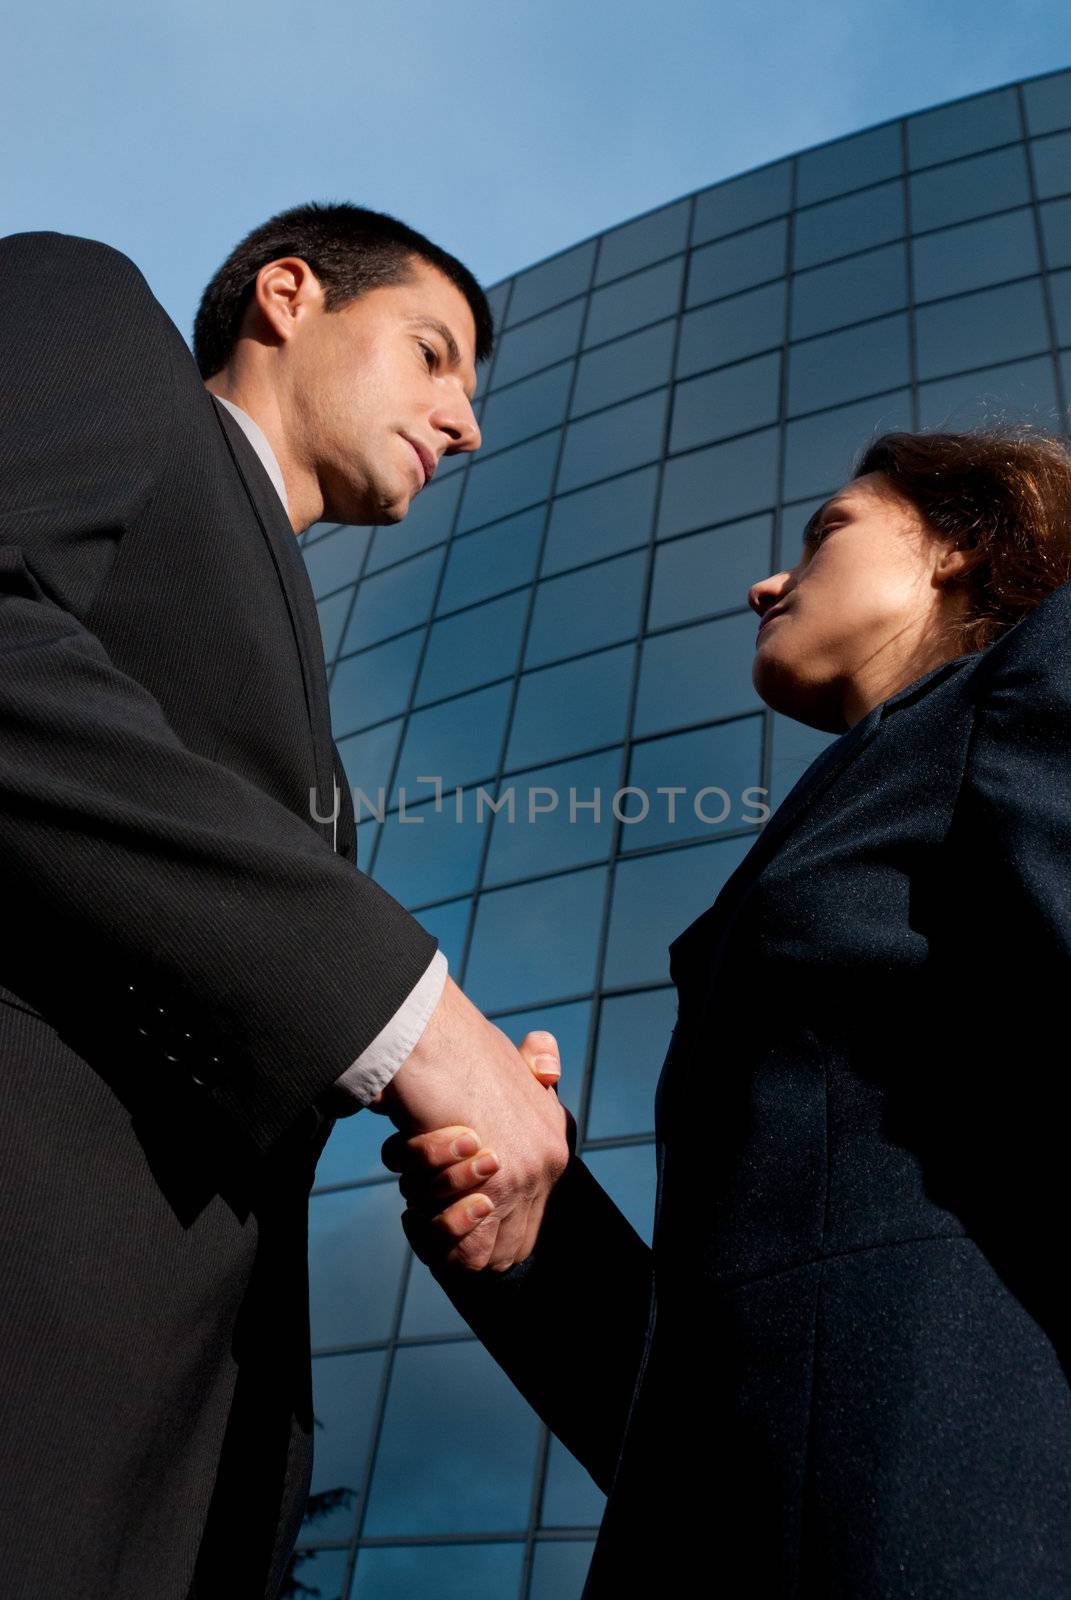 Handshake business man and woman on modern building background